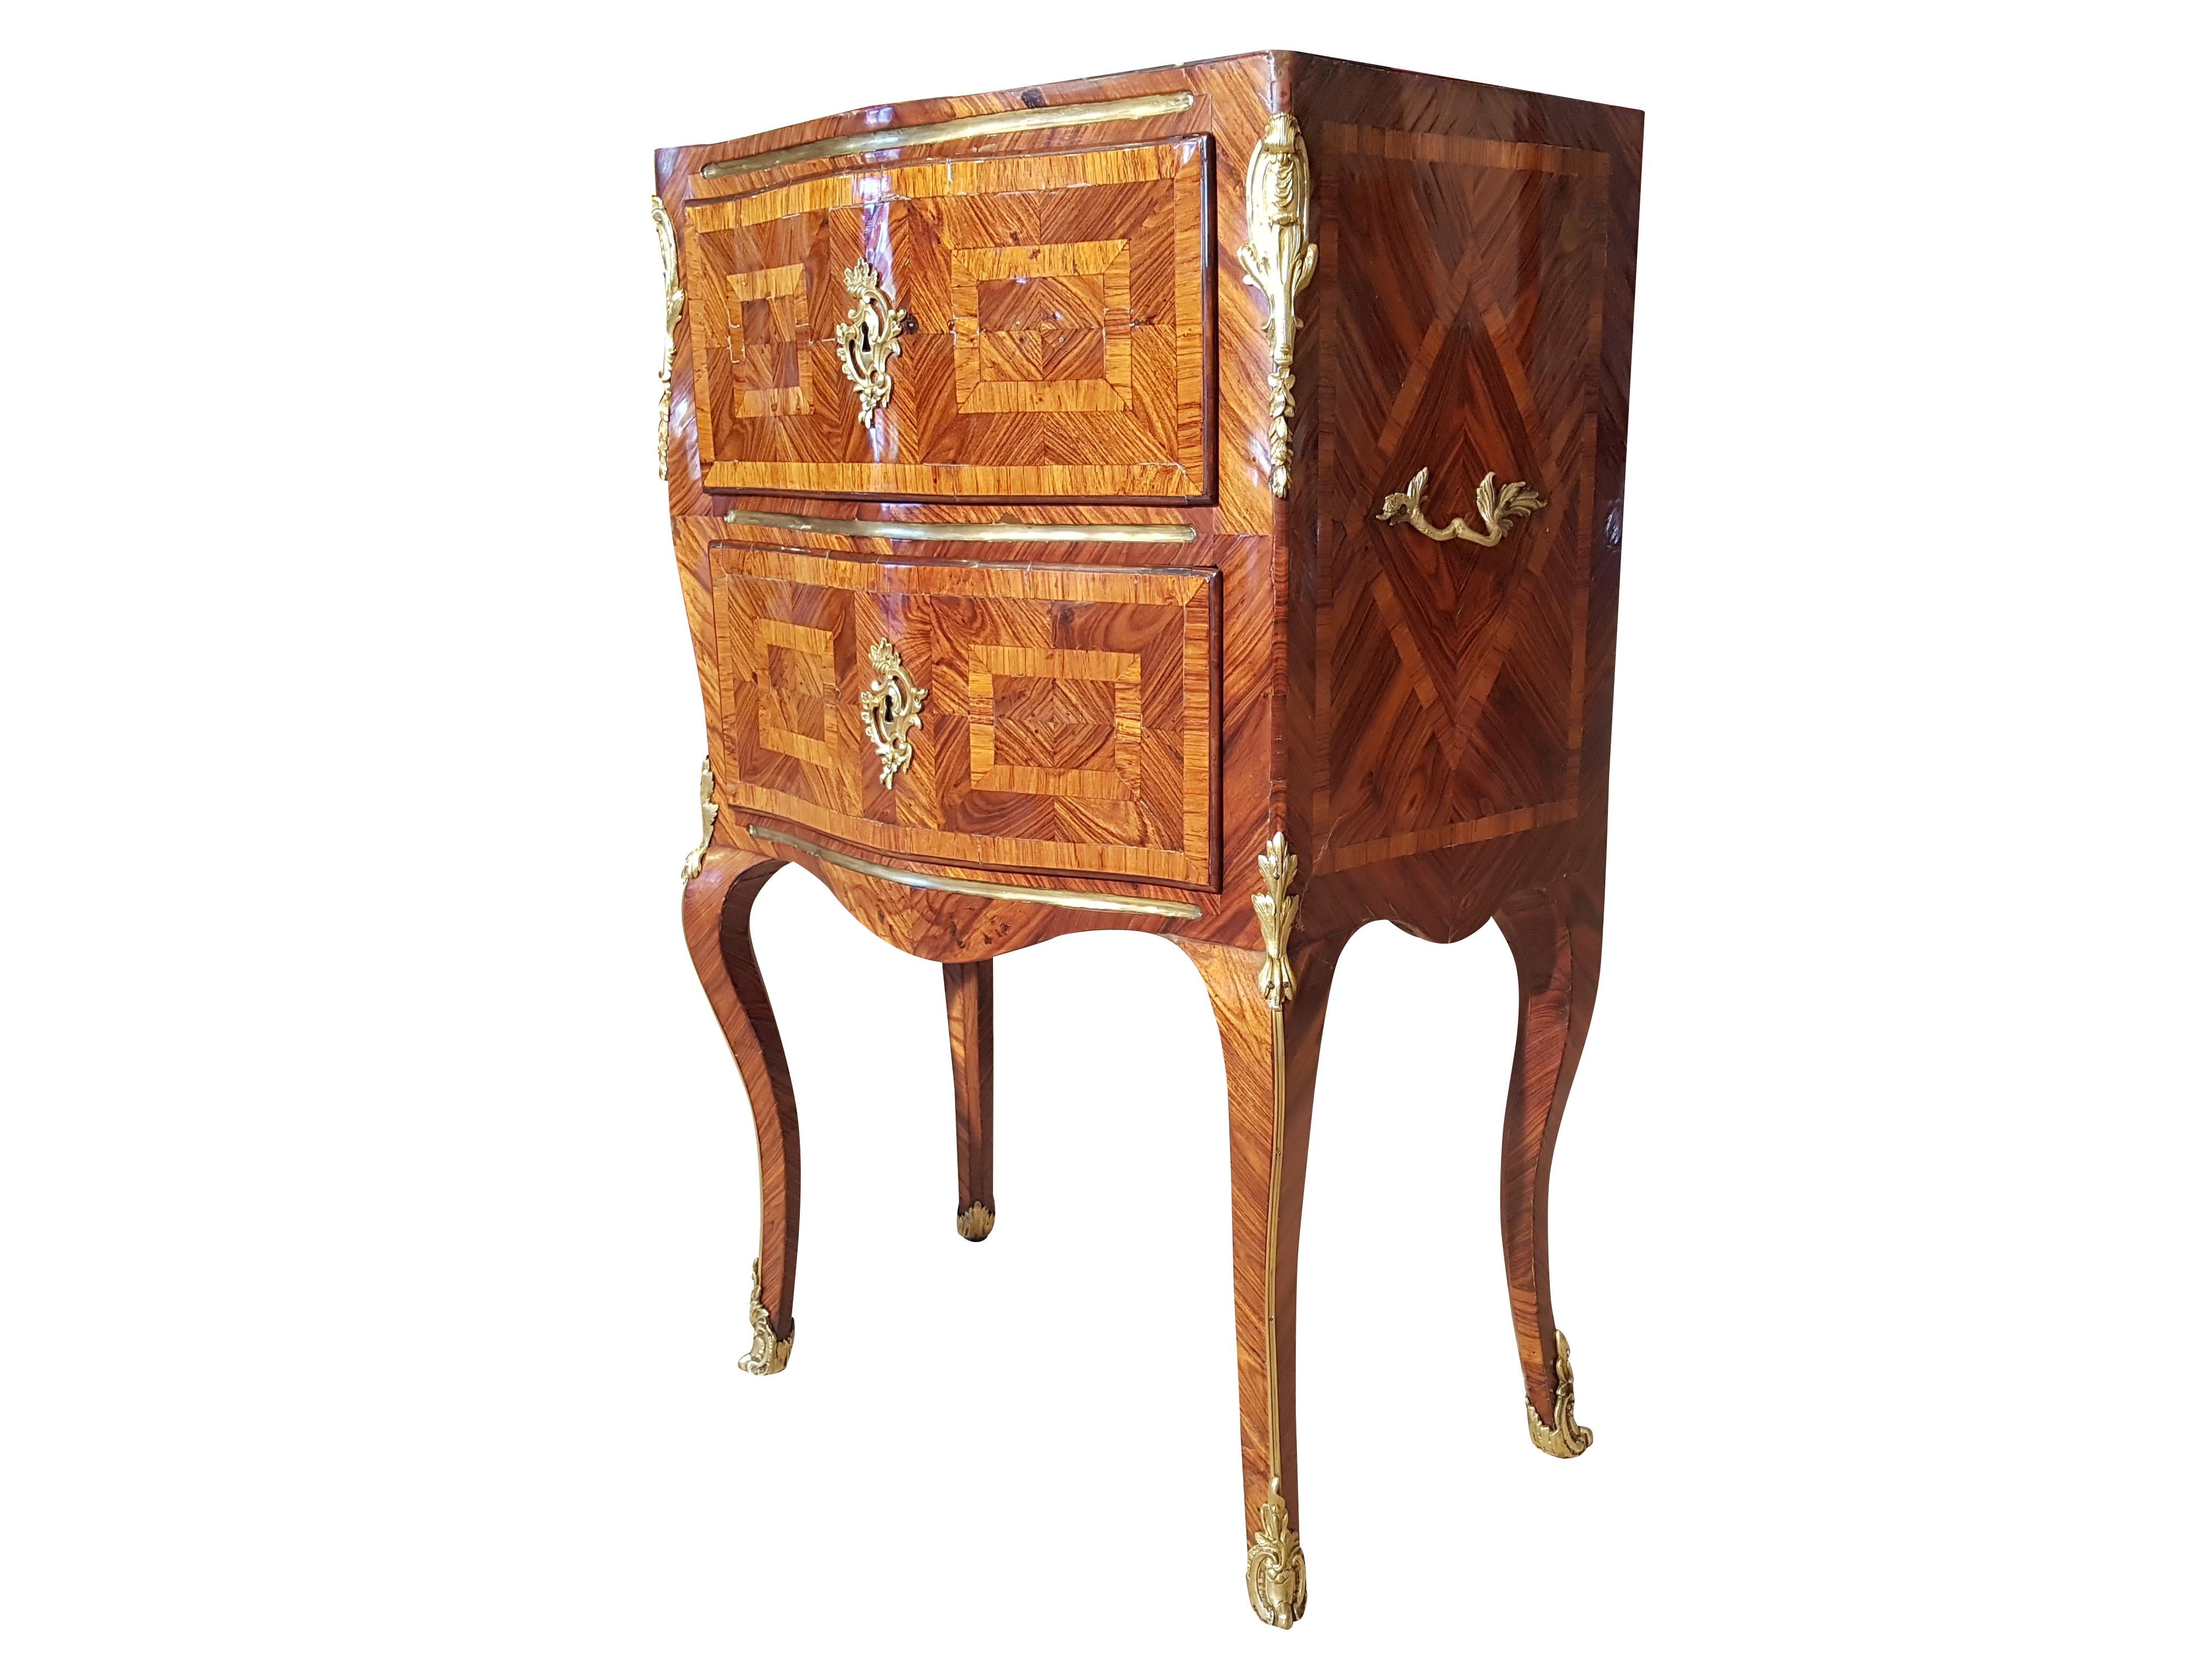 Rare, petite French commode from the late Rococo period. Original piece build, circa 1800, comes with a restoration booklet and “Certificate of Authenticity”. Features a stunning palisander veneer and fire gilded fittings. Got restored while